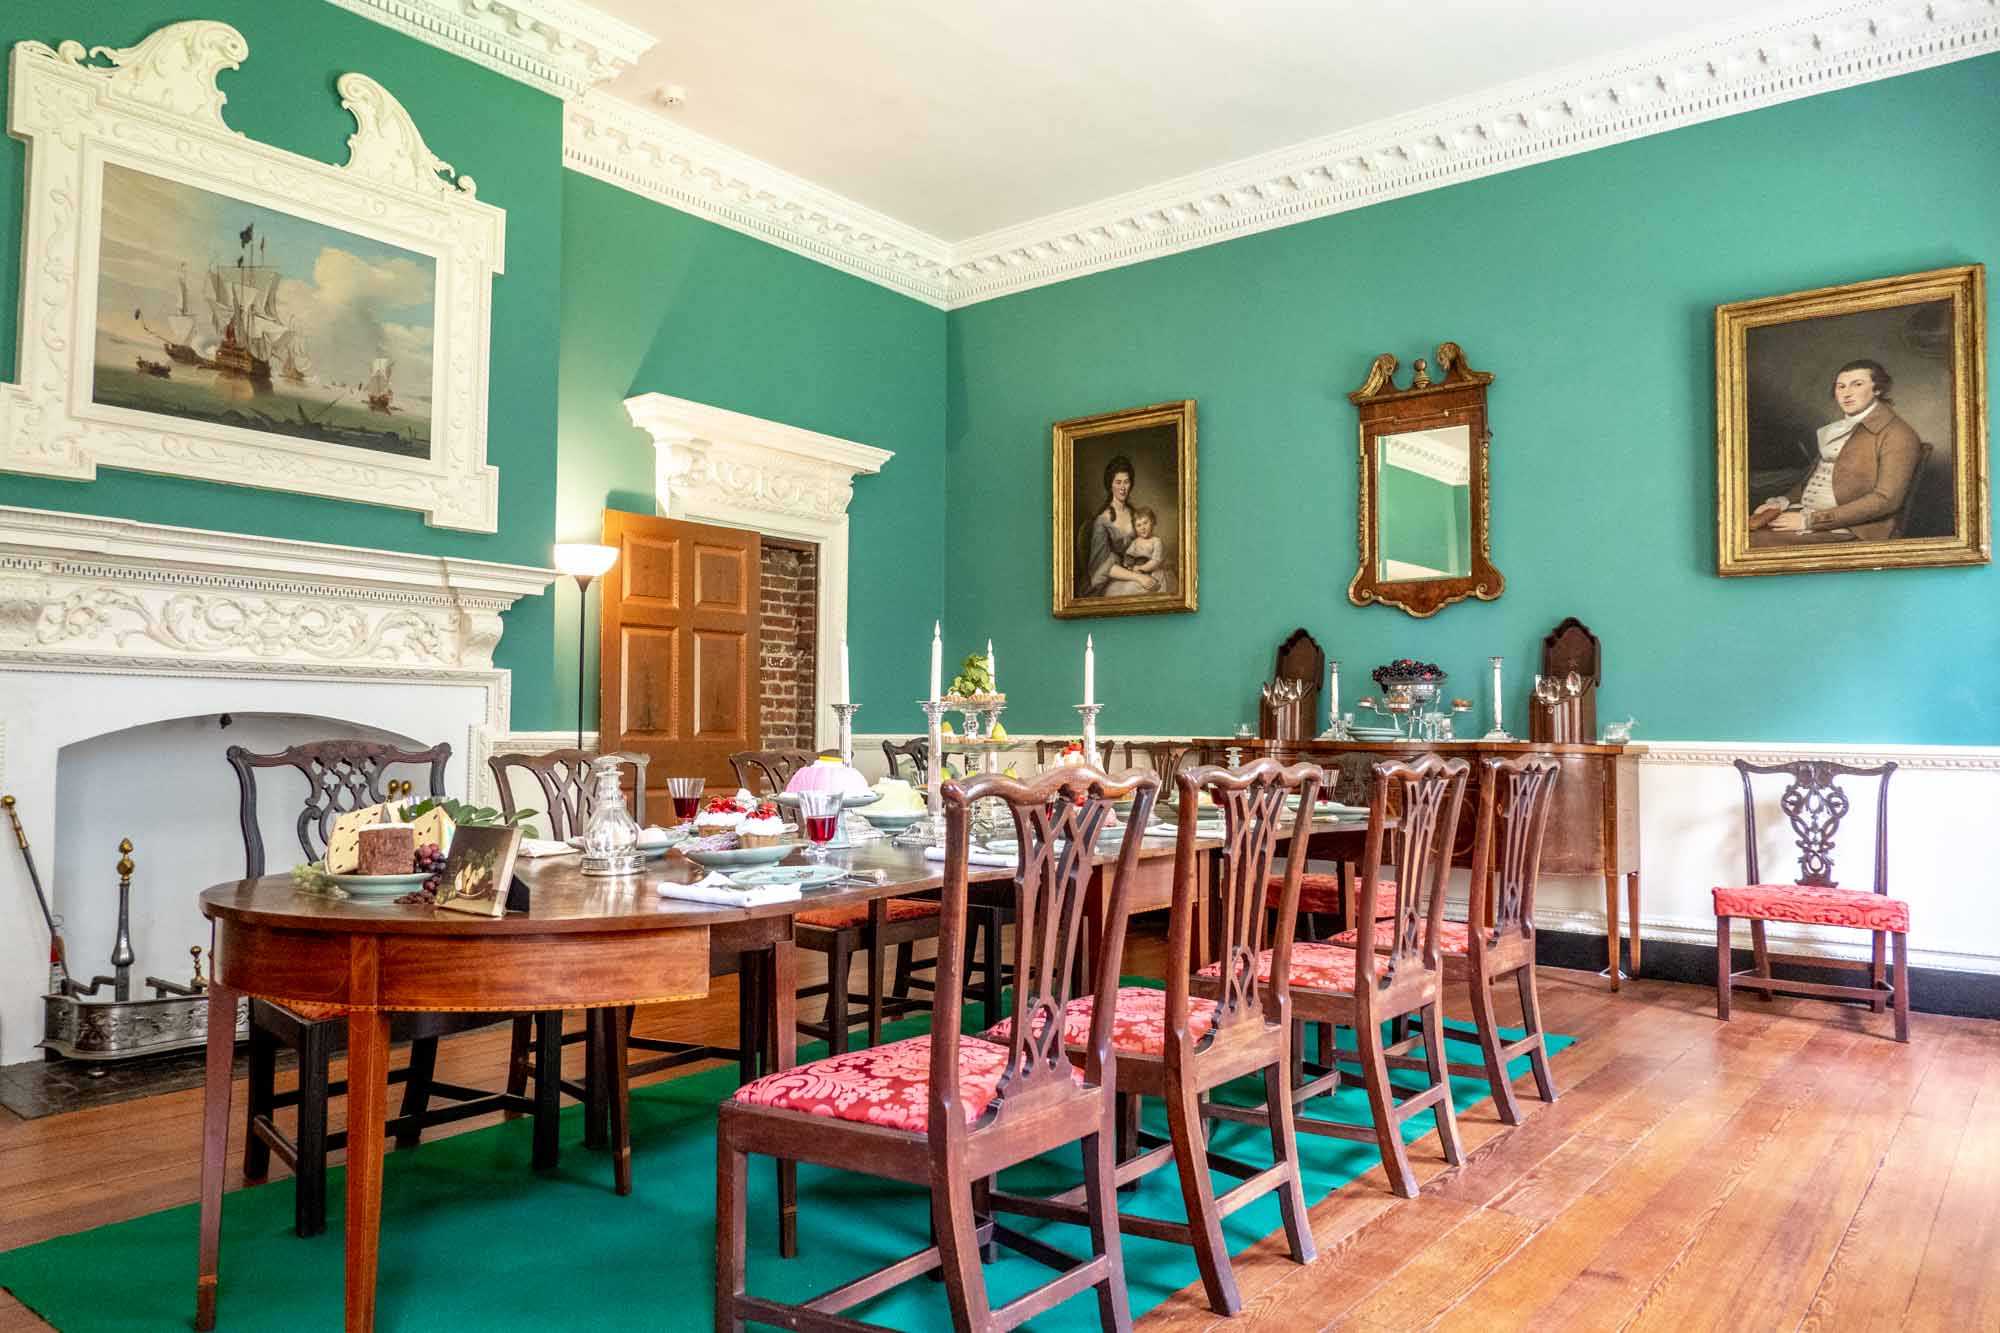 Dining room with portraits on its turquoise walls and formal dining table set for dinner